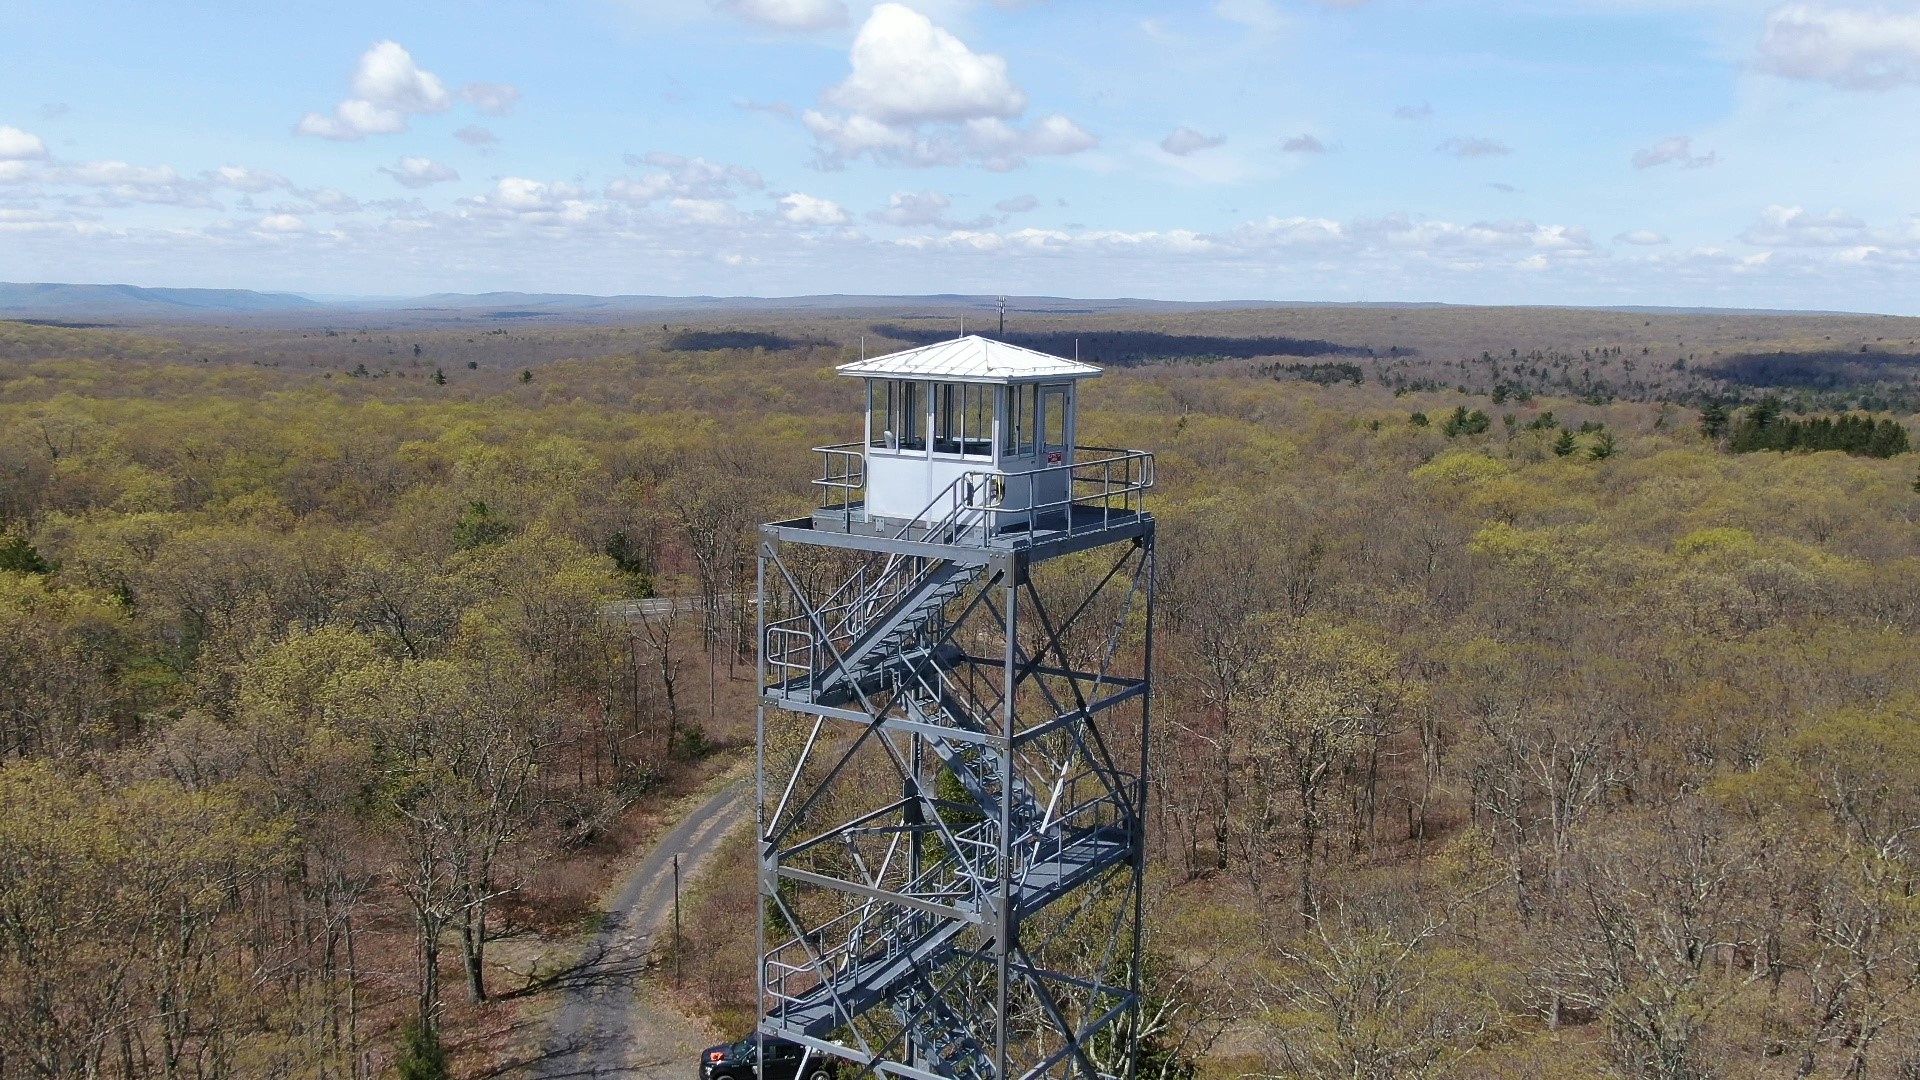 During the wildfire season in Pennsylvania, there's a watchful eye in fire towers looking out over the woodland beauty.